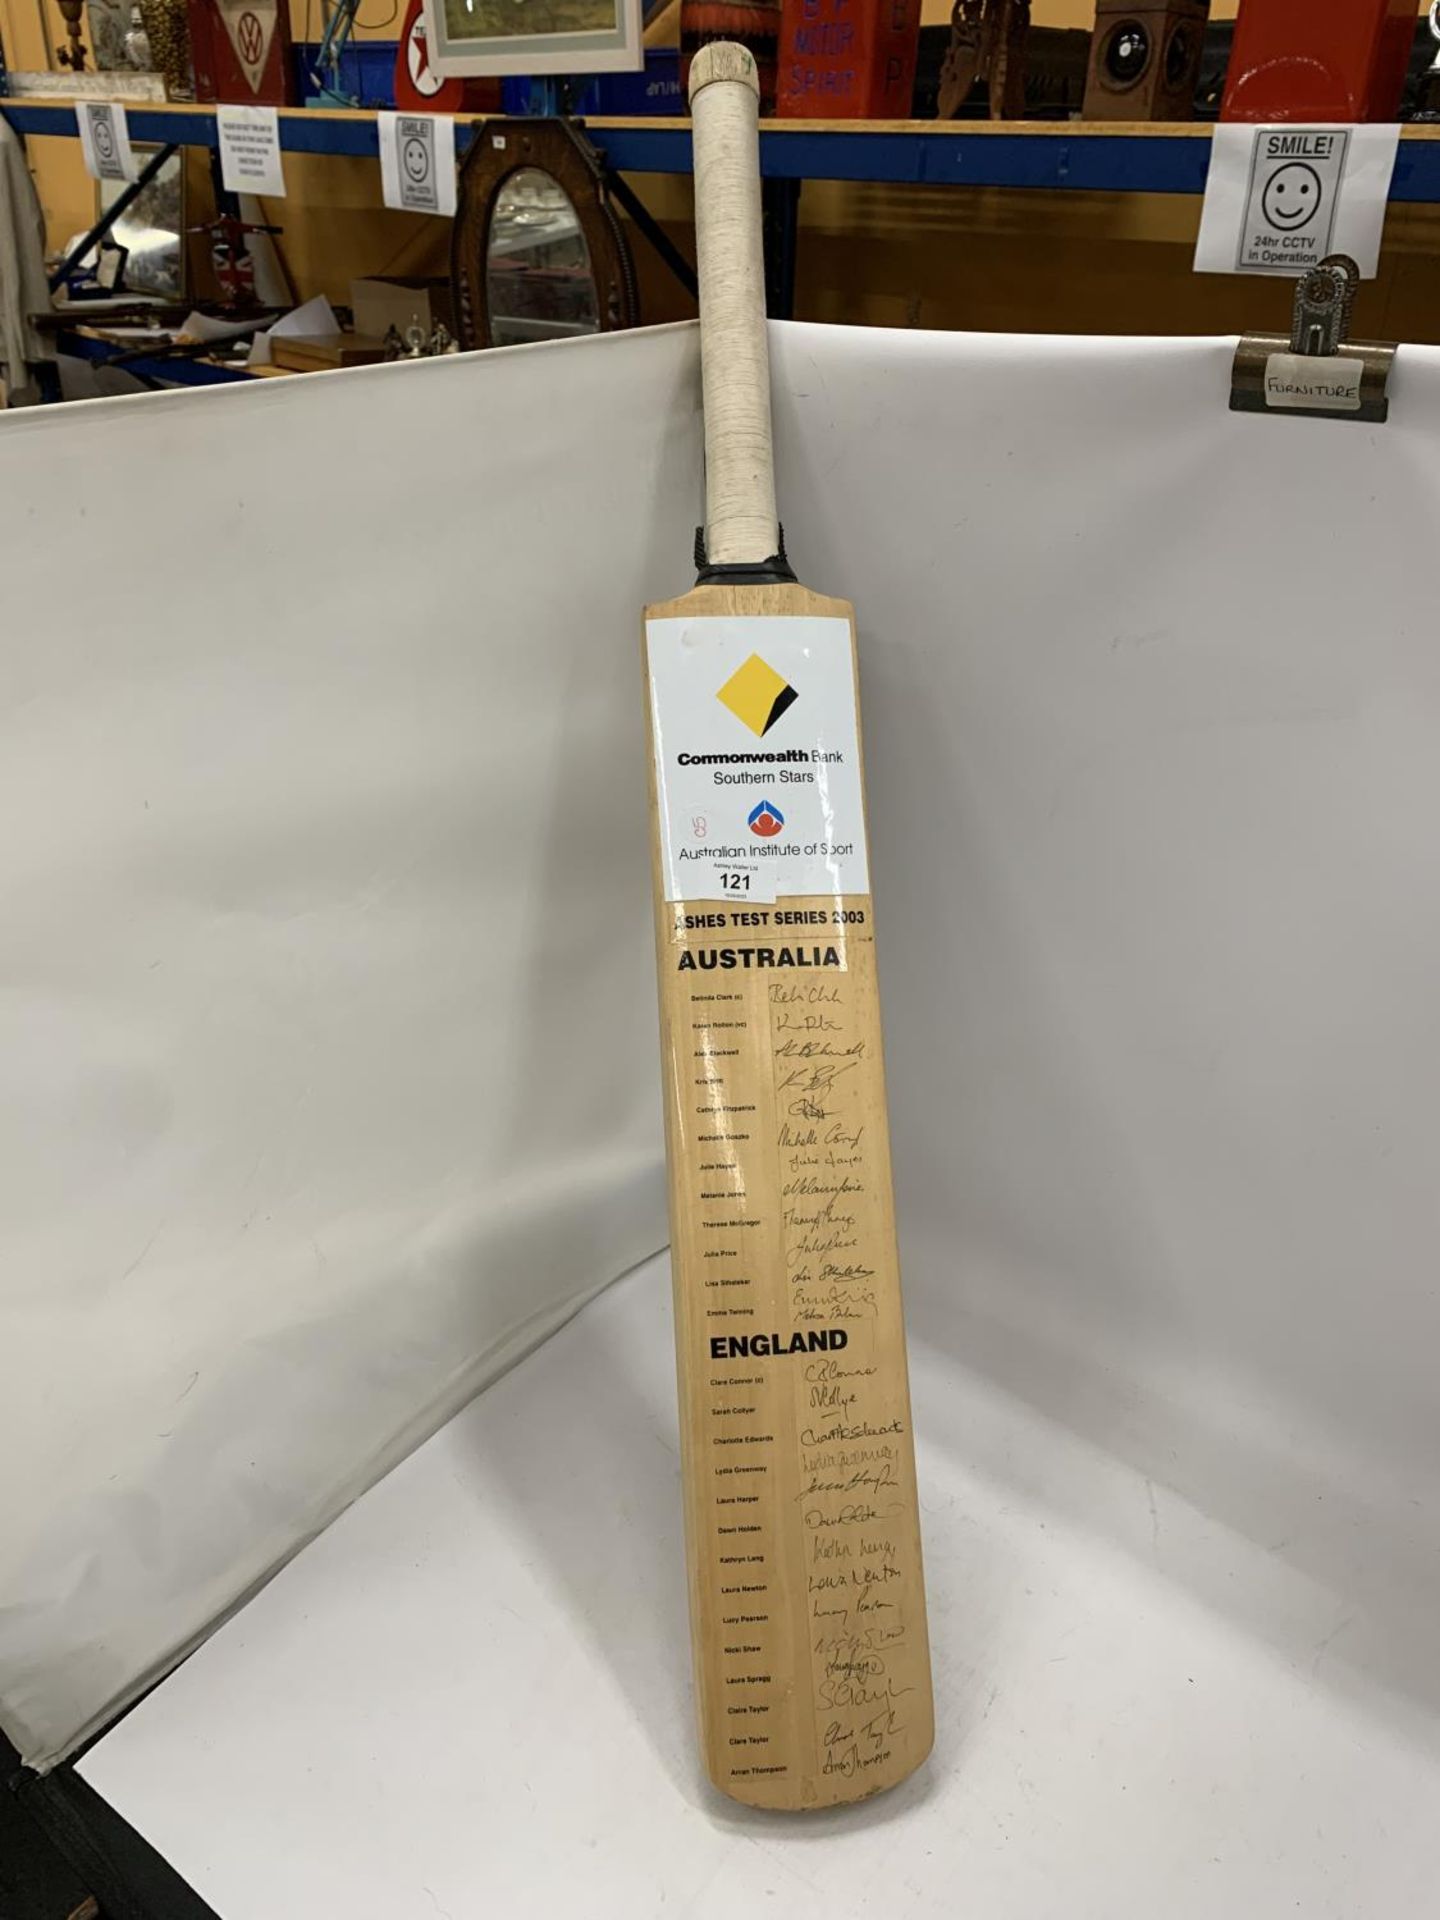 A RARE 2003 LADIES ASHES SERIES BAT, SIGNED BY BOTH TEAMS